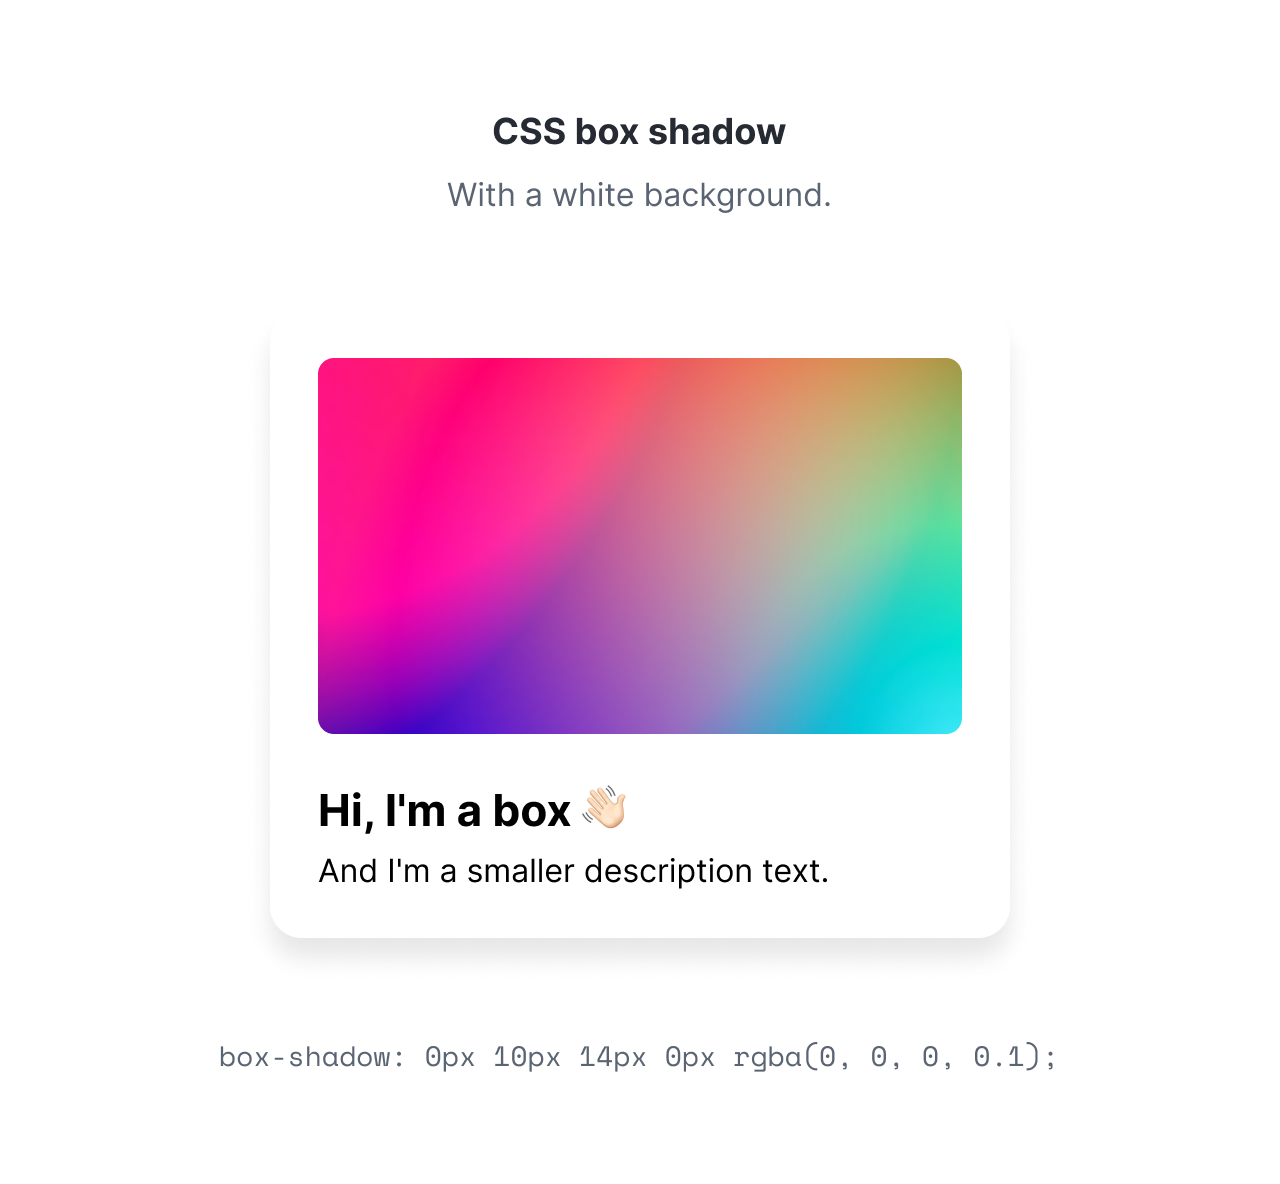 A card component with a CSS box shadow on a white background.